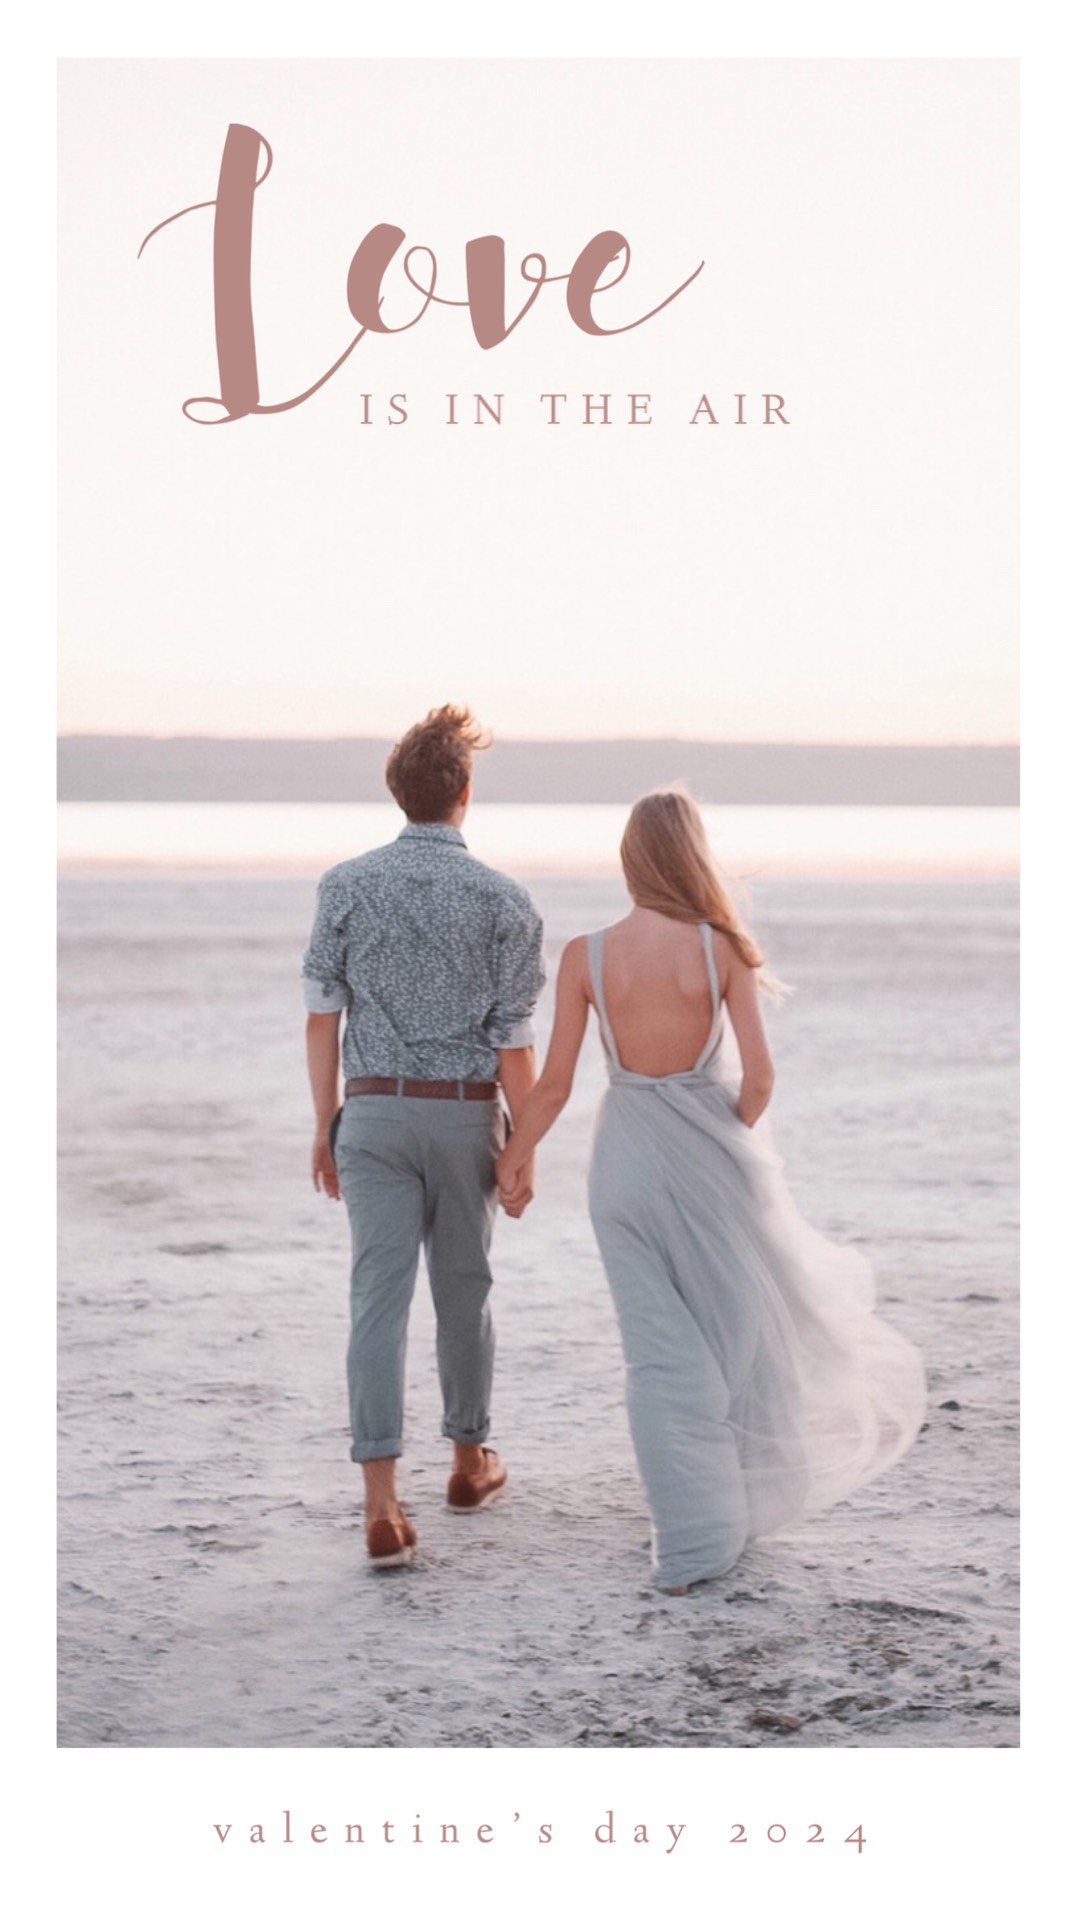 A Man And Woman Walking On The Beach Holding Hands Love Story Template